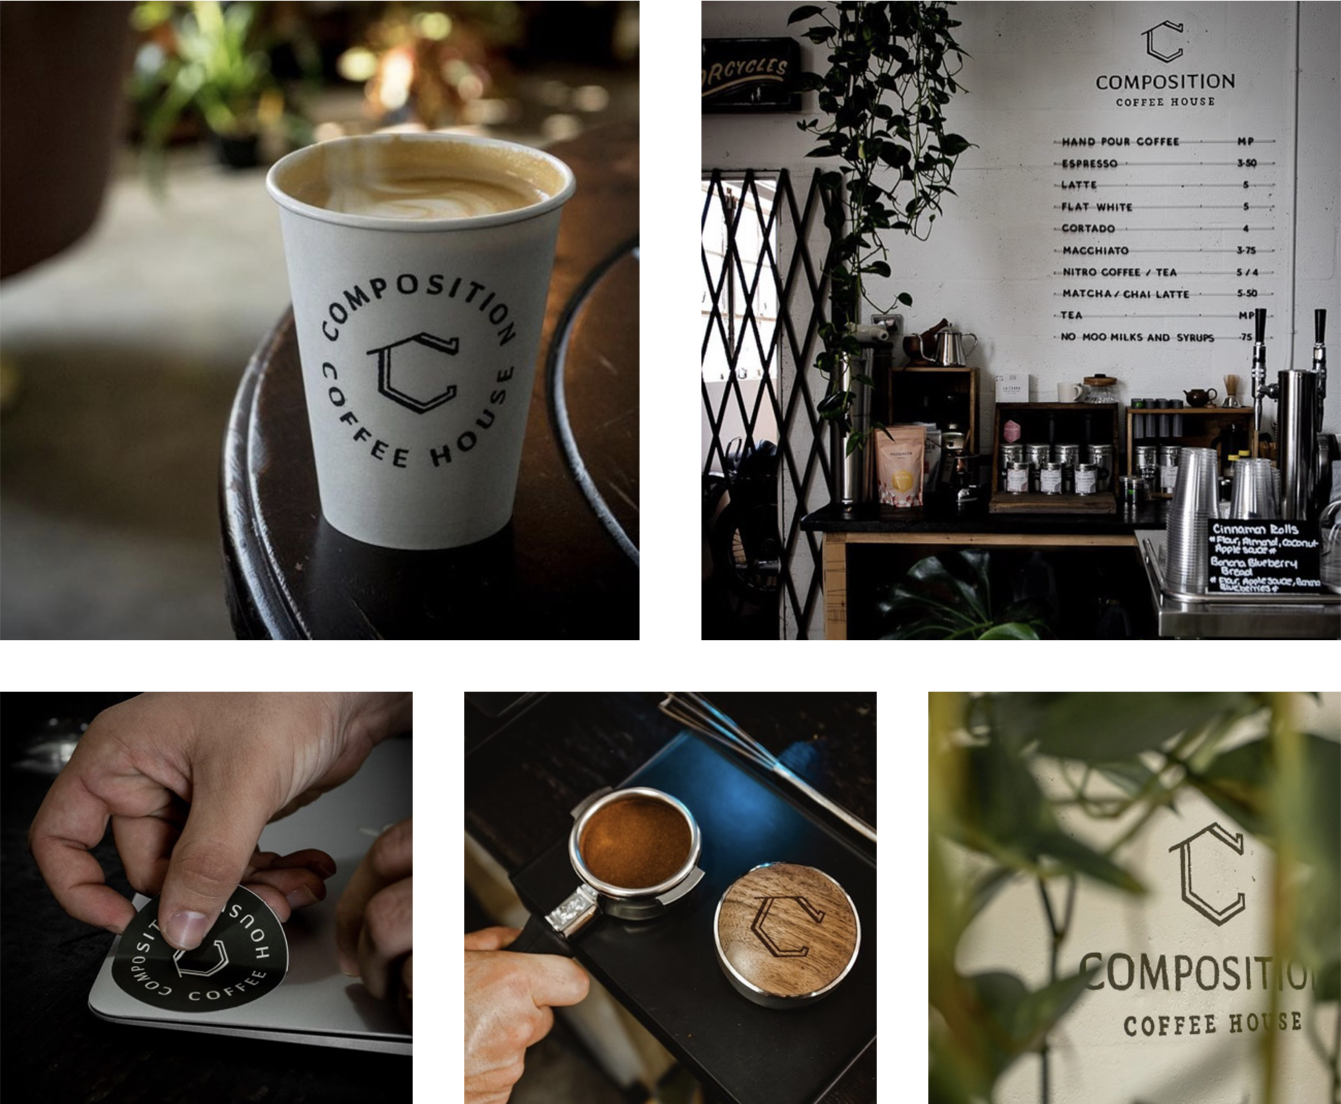 Collage of images showing off Composition Coffee's branding applied to paper coffee cups, wall menus, stickers and a coffee tamper.